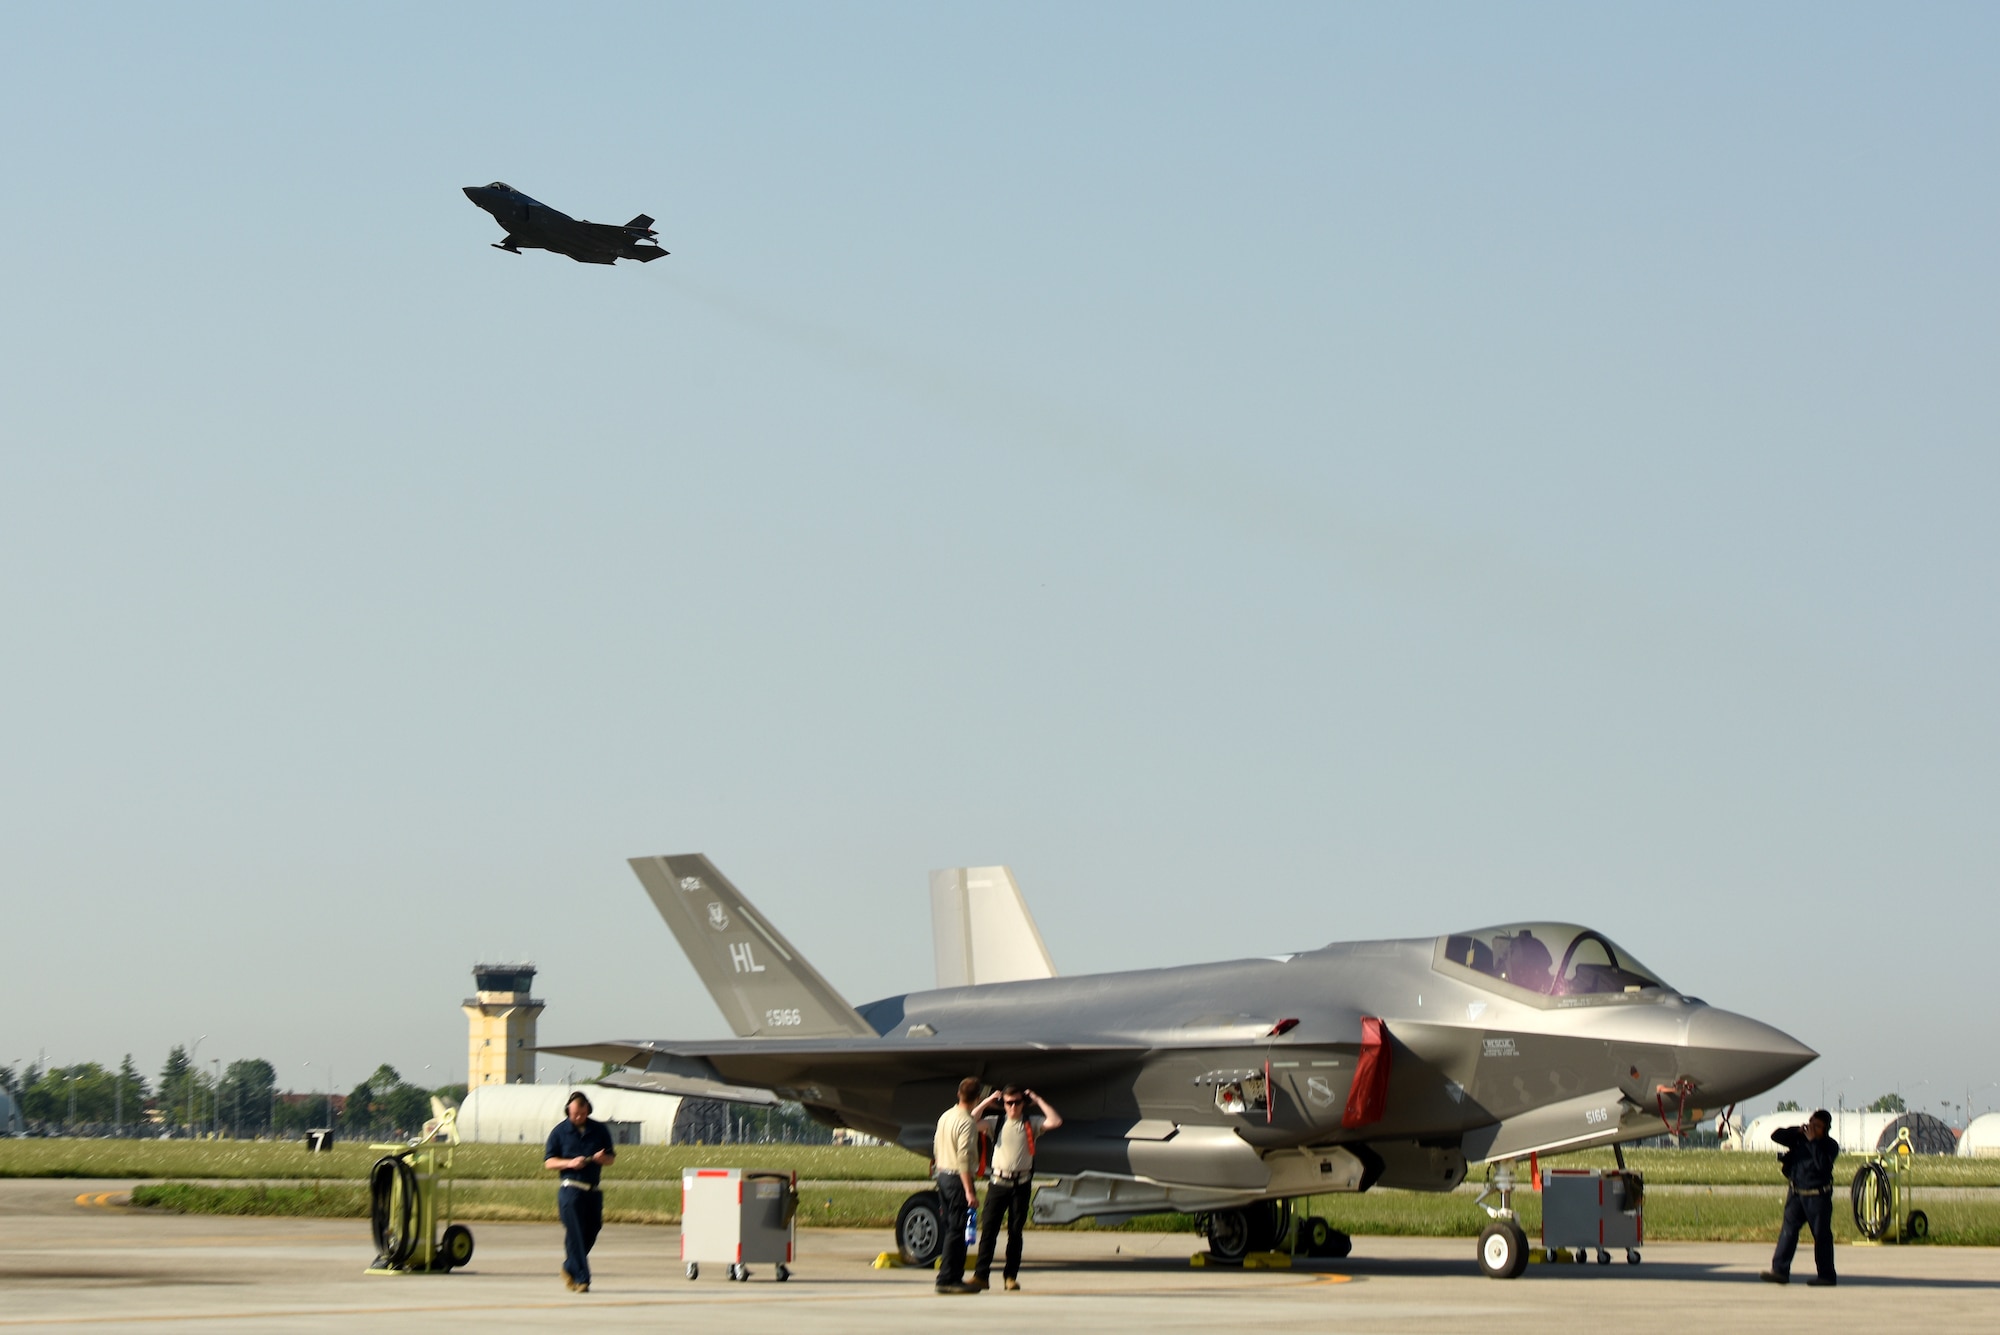 An F-35A Lightning II fighter jet sits on the flightline while another F-35A takes off during Astral Knight 2019 June 3, 2019, at Aviano Air Base, Italy. The F-35A contains state-of-the-art tactical data links that provide secure sharing of data among its flight members as well as other airborne, surface and ground-based platforms. The Airmen are deployed from the active duty 388th and Reserve 419th Fighter Wings at Hill Air Force Base, Utah. (U.S. Air Force photo by Tech. Sgt. Jim Araos)